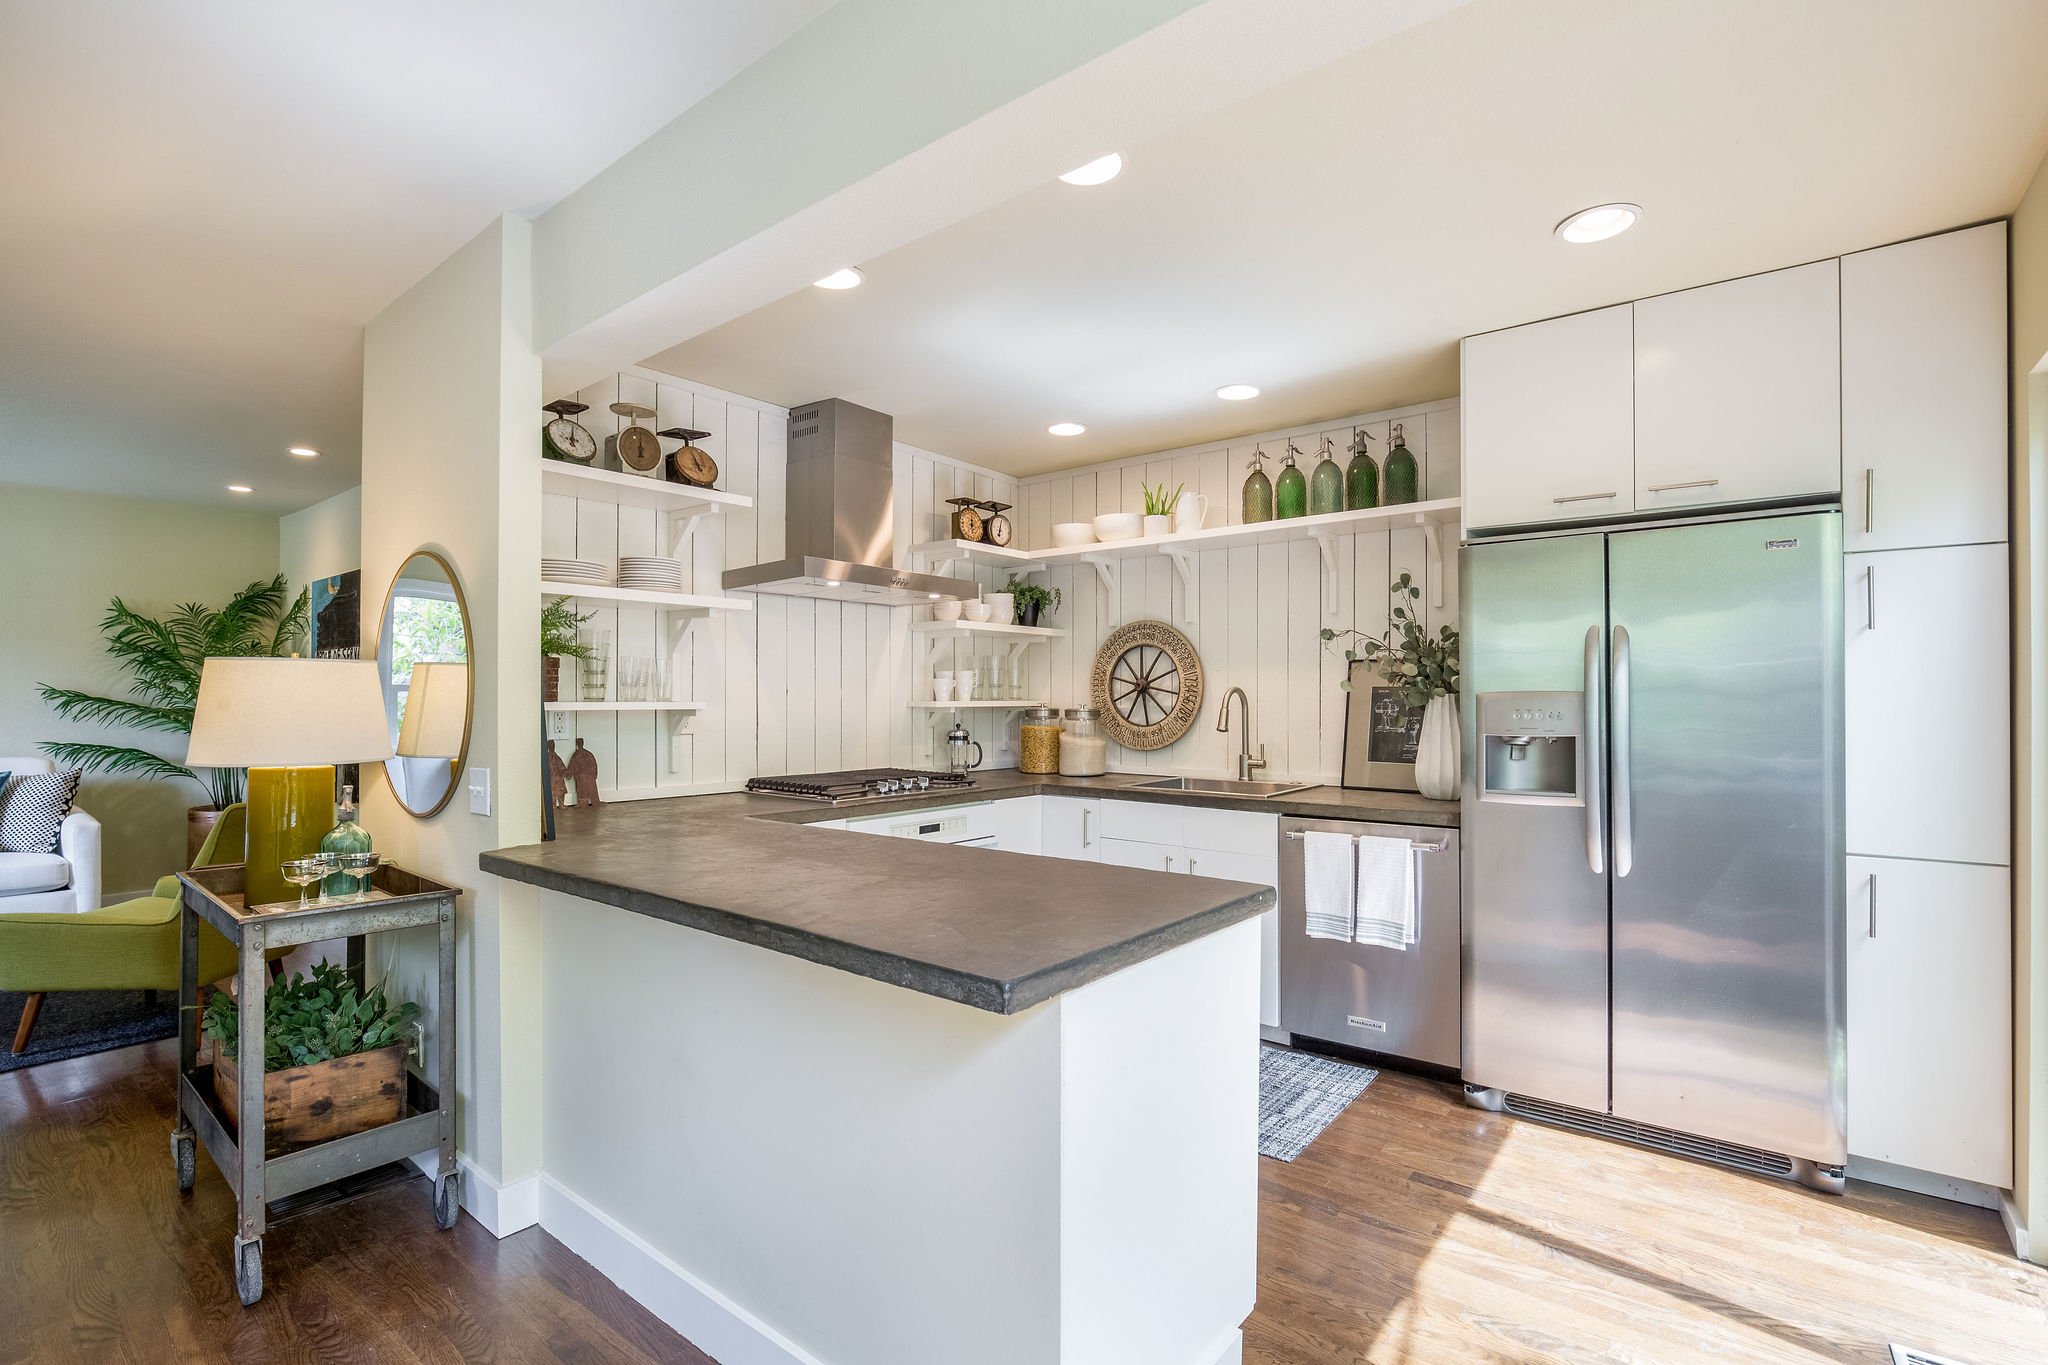  image description: interior kitchen with connected island, hardwoods and brown countertops 